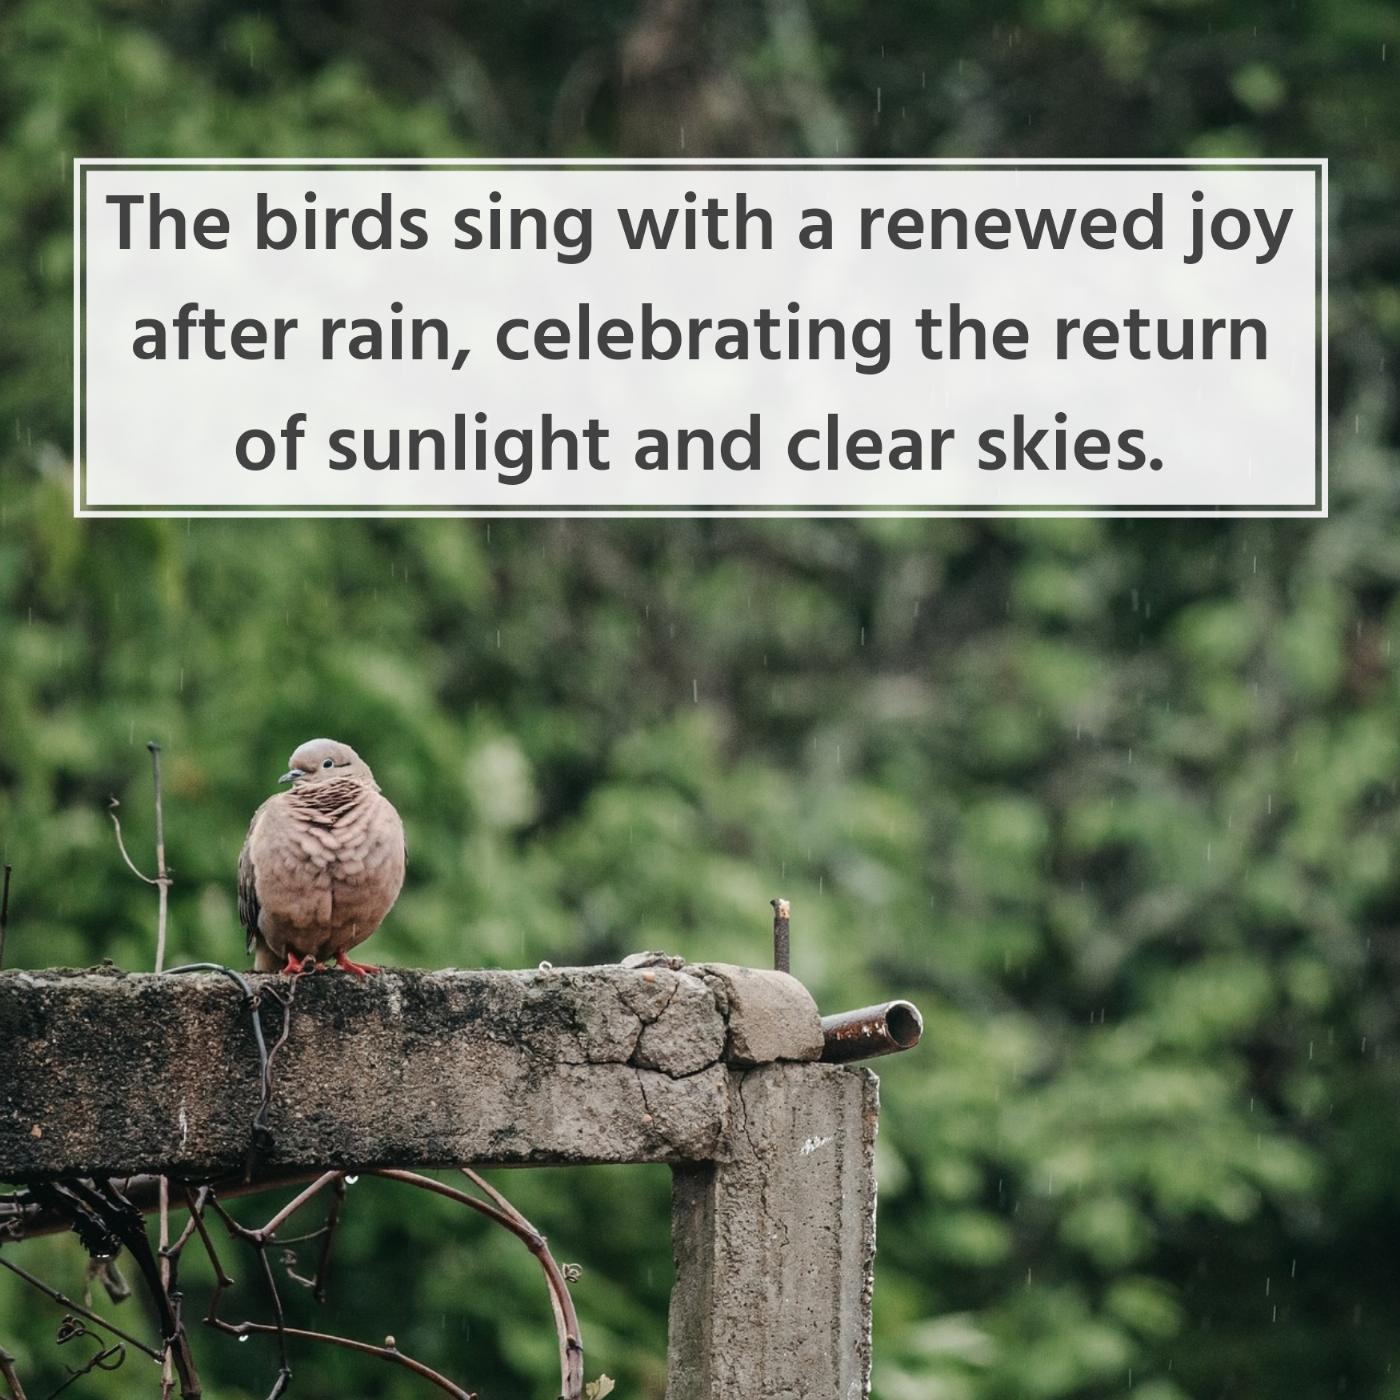 The birds sing with a renewed joy after rain